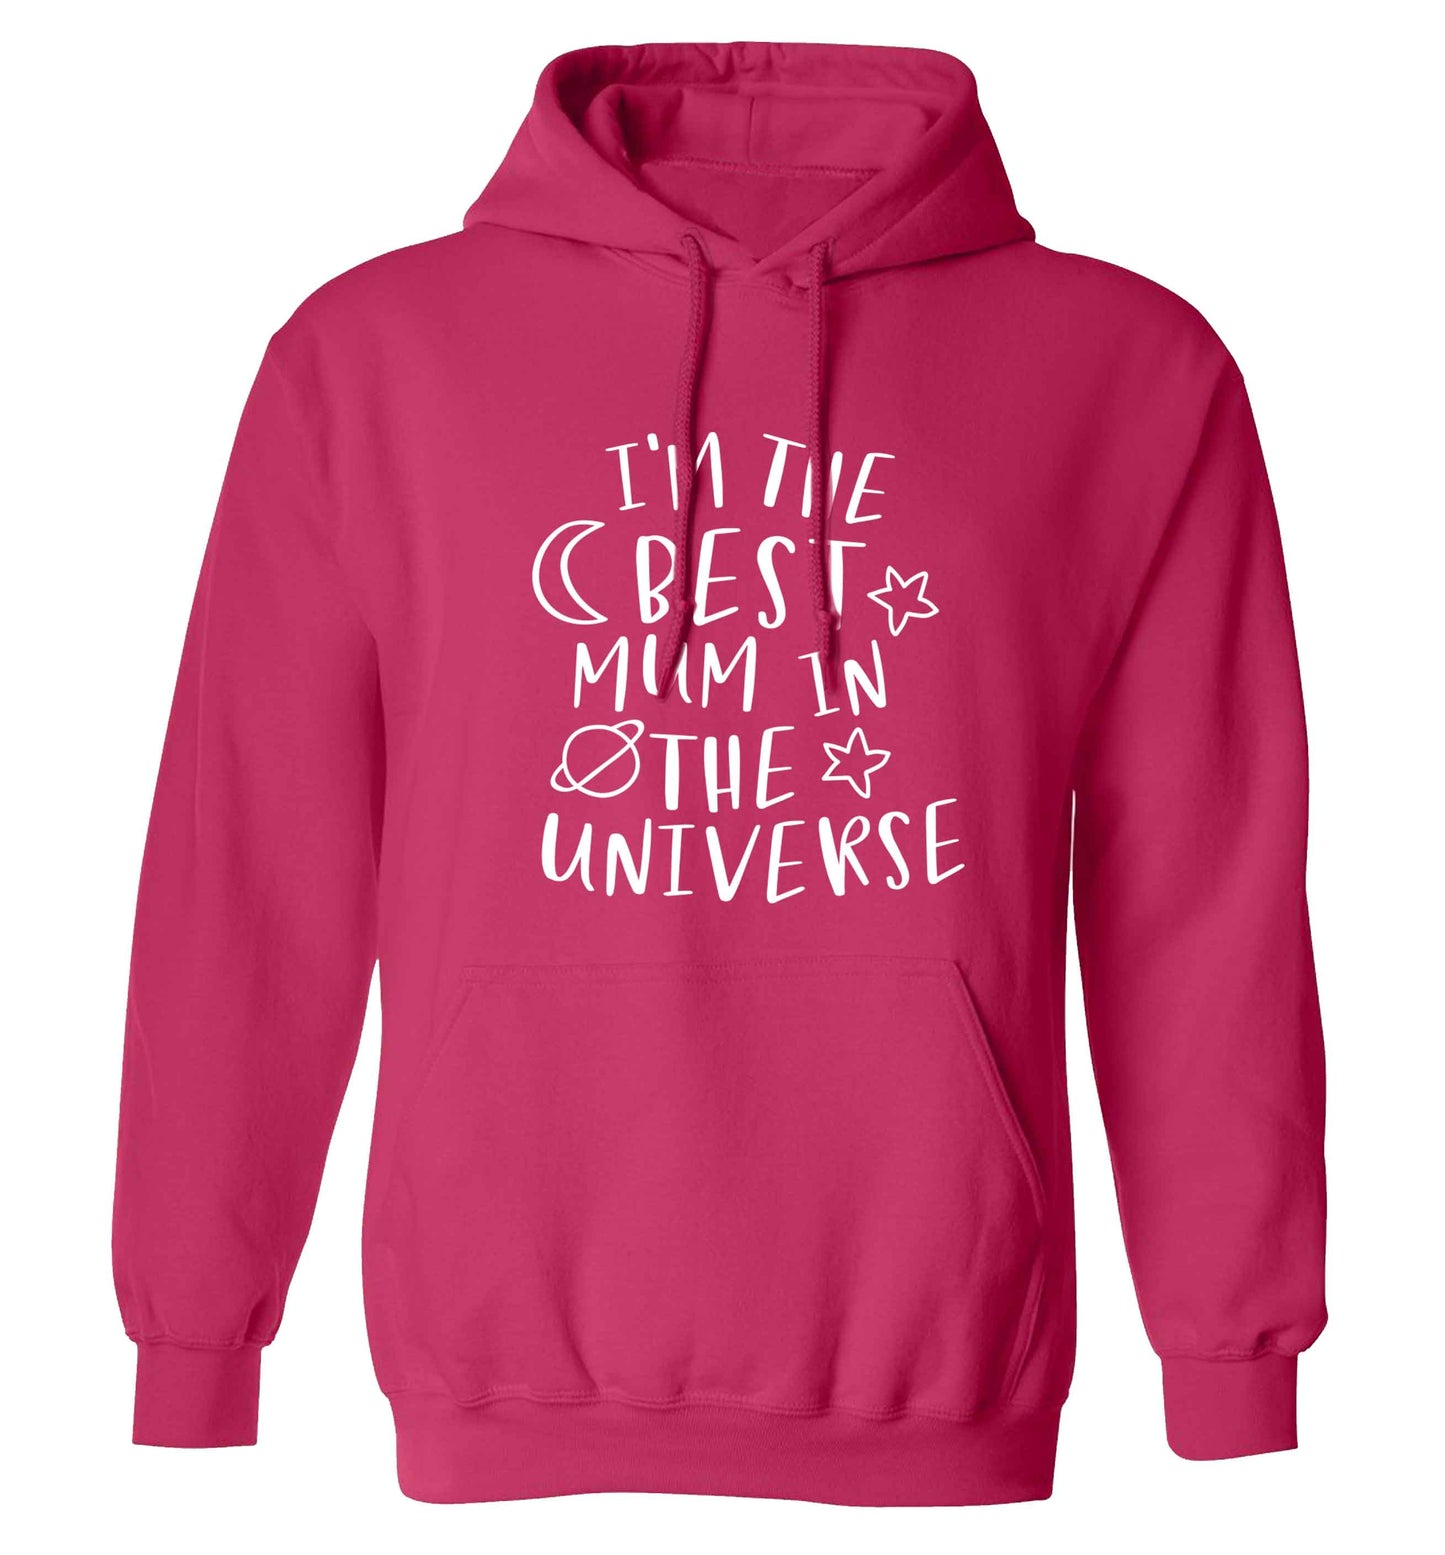 I'm the best mum in the universe adults unisex pink hoodie 2XL